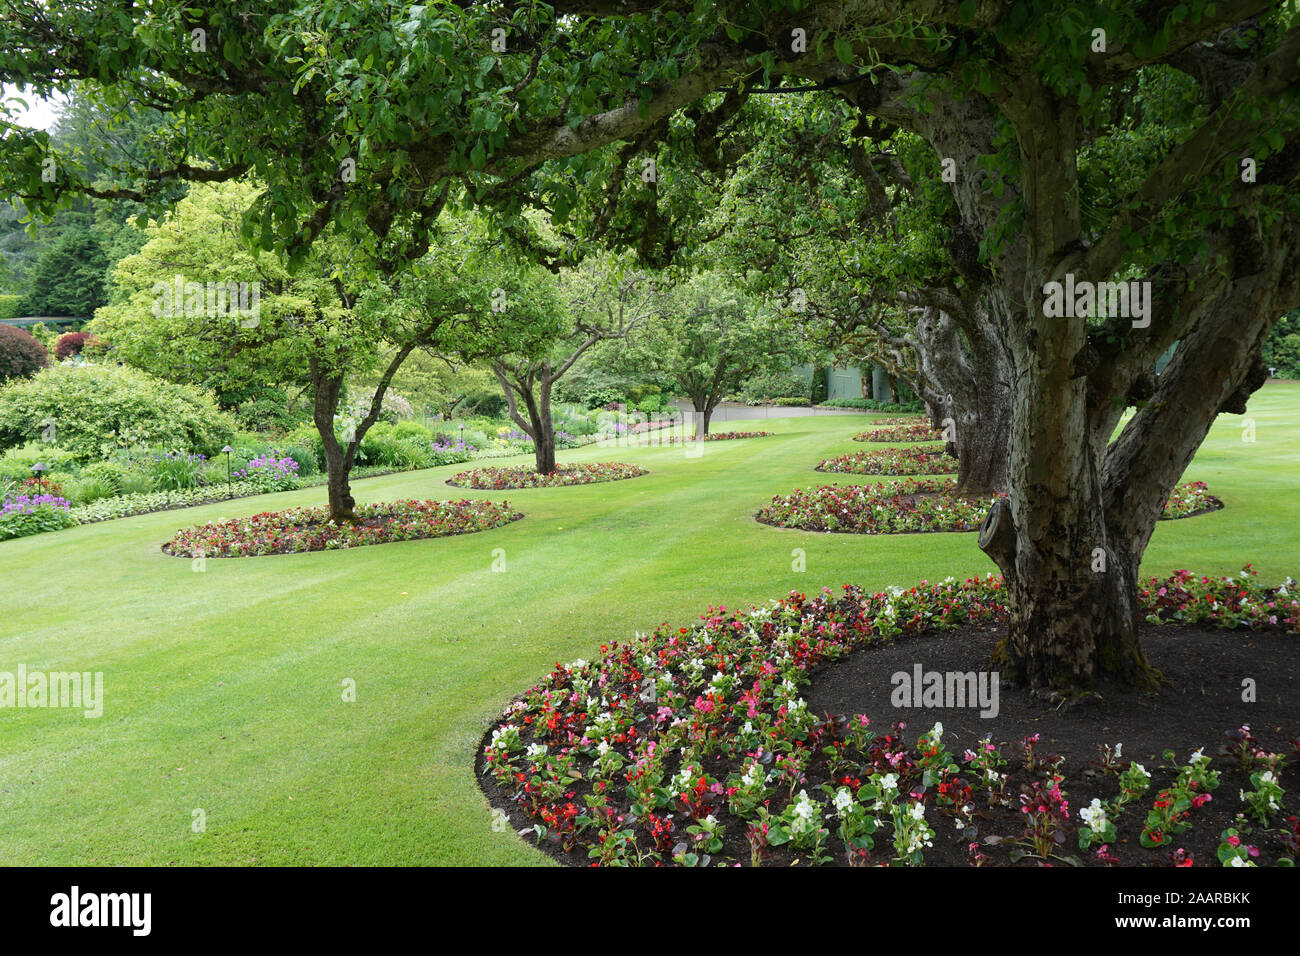 Park landscaped with trees and flowers Stock Photo